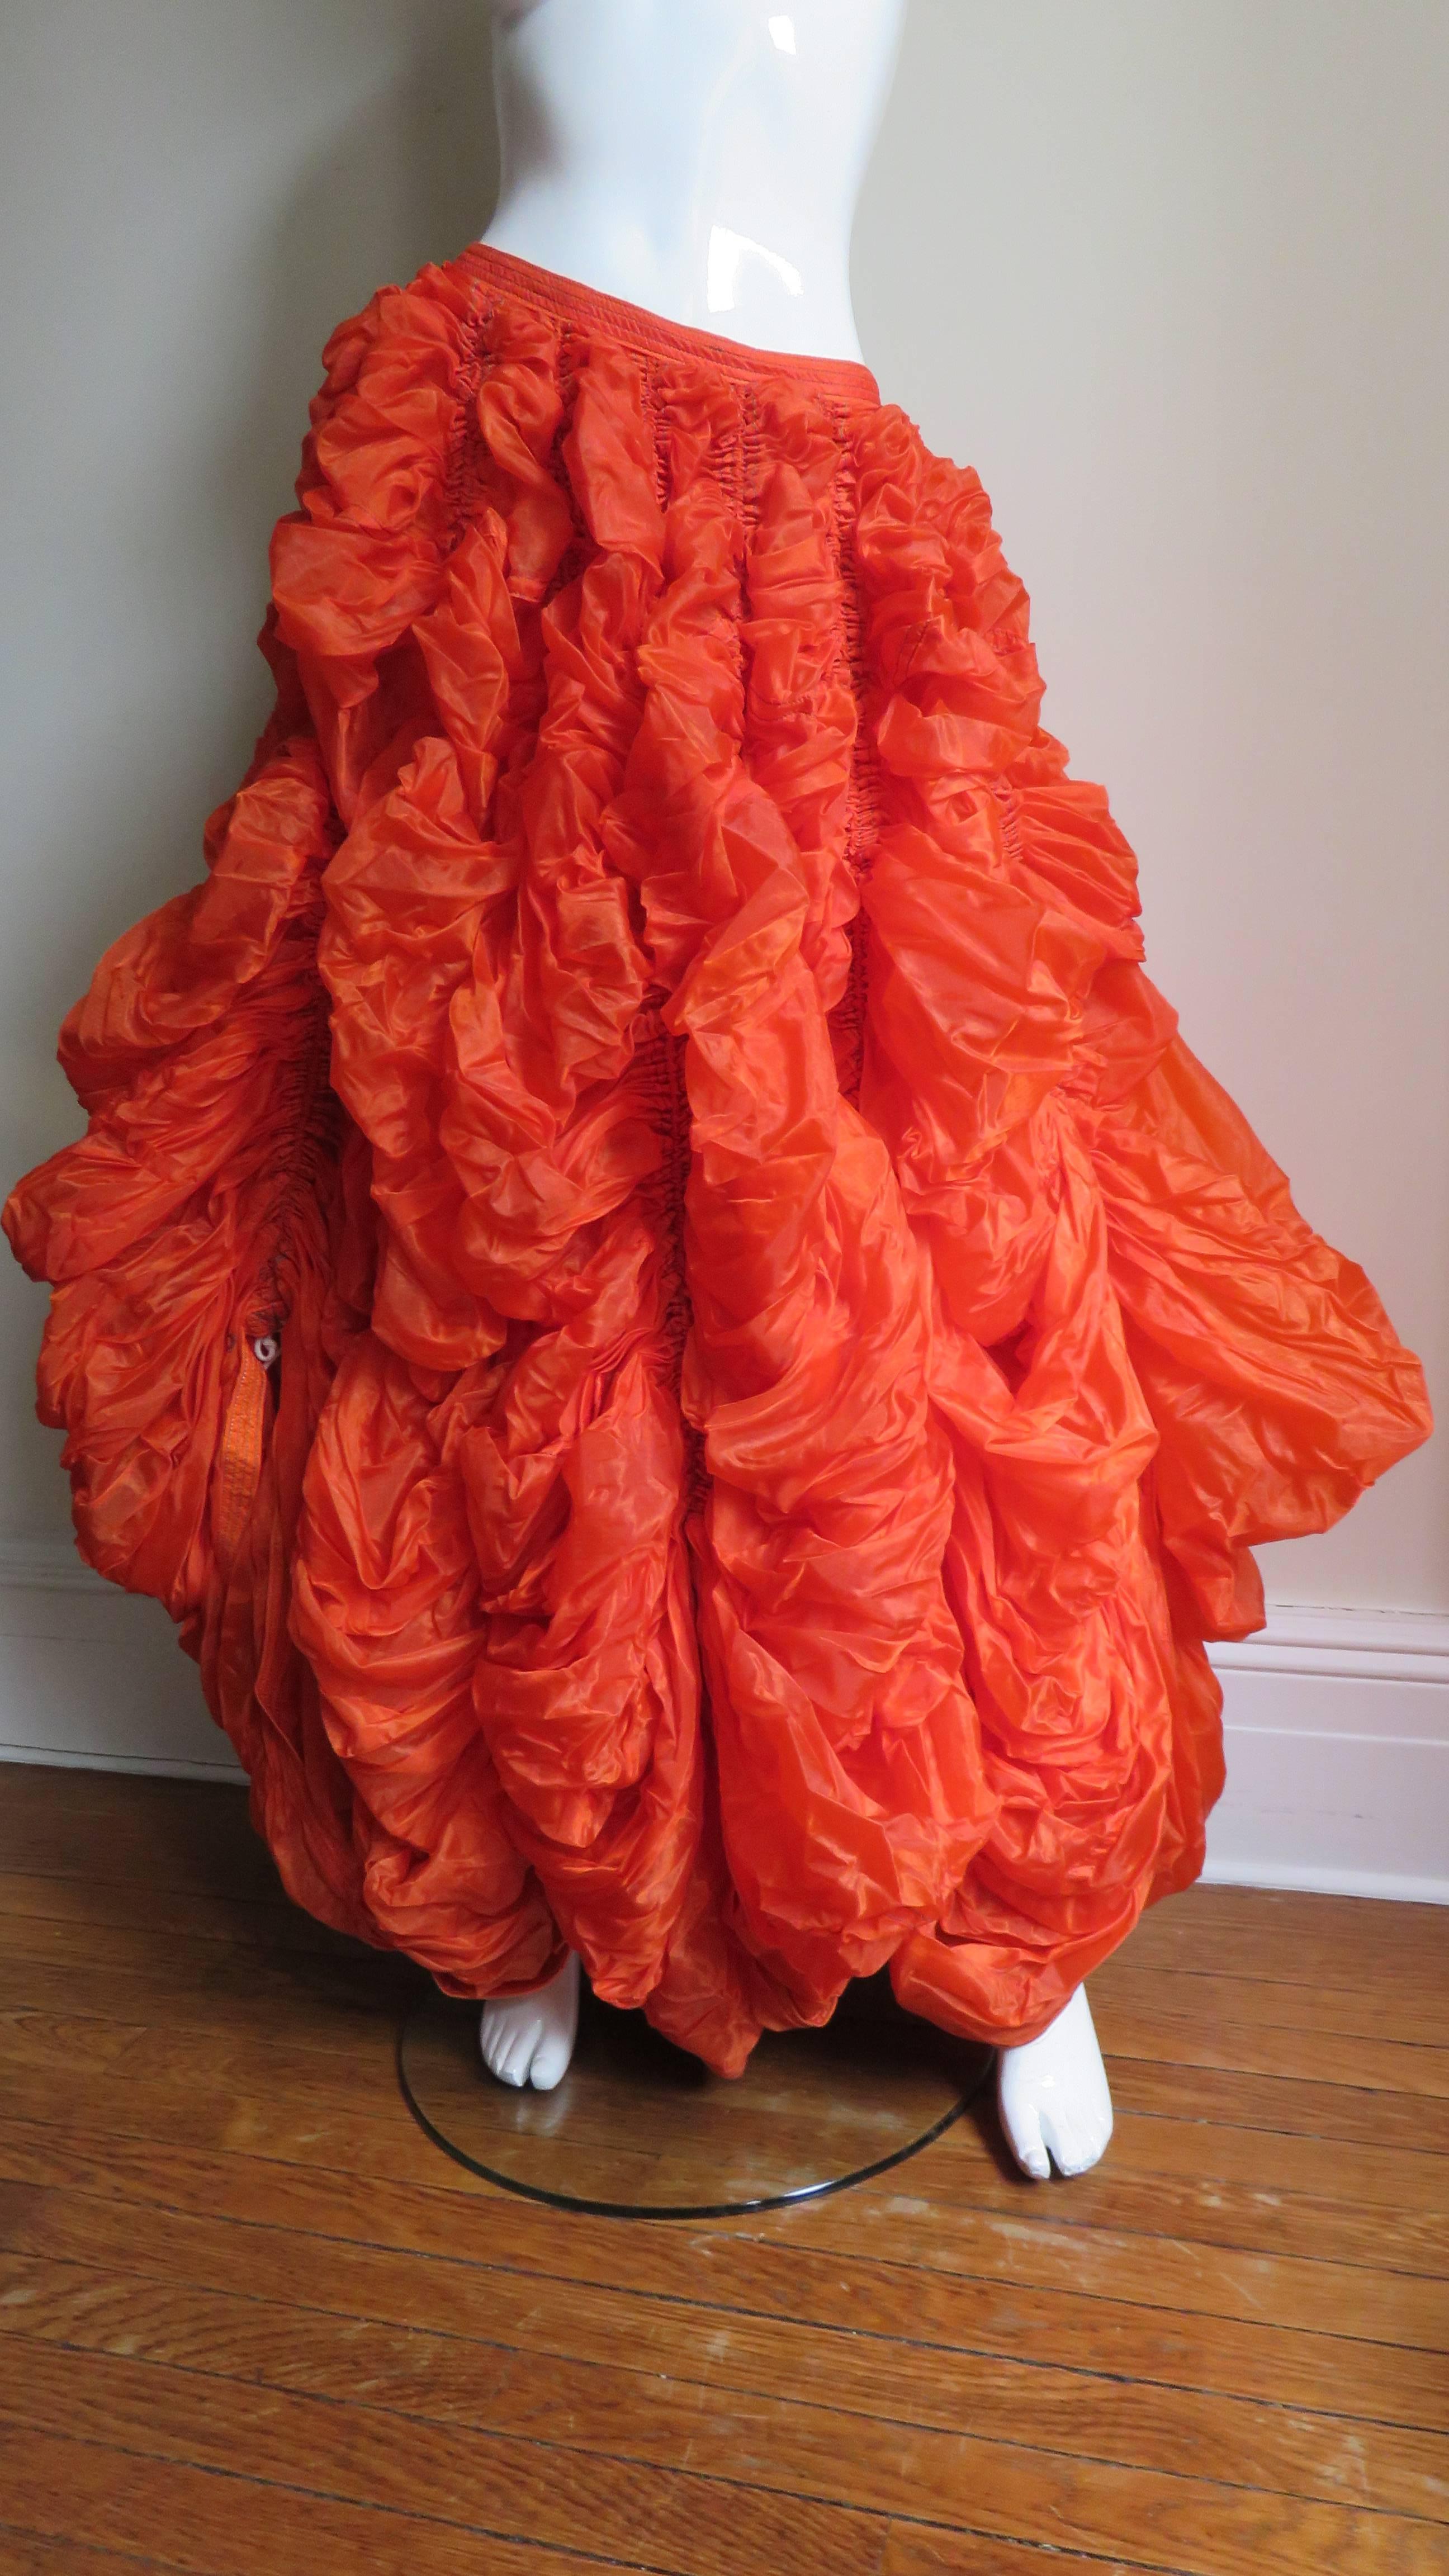 A rare item from Norma Kamali's noteworthy early OMO collection - a tangerine parachute skirt- one was exhibited at the MET in New York. Massive amounts of orange nylon with vertical lines of stitching containing white cord drawstrings around the